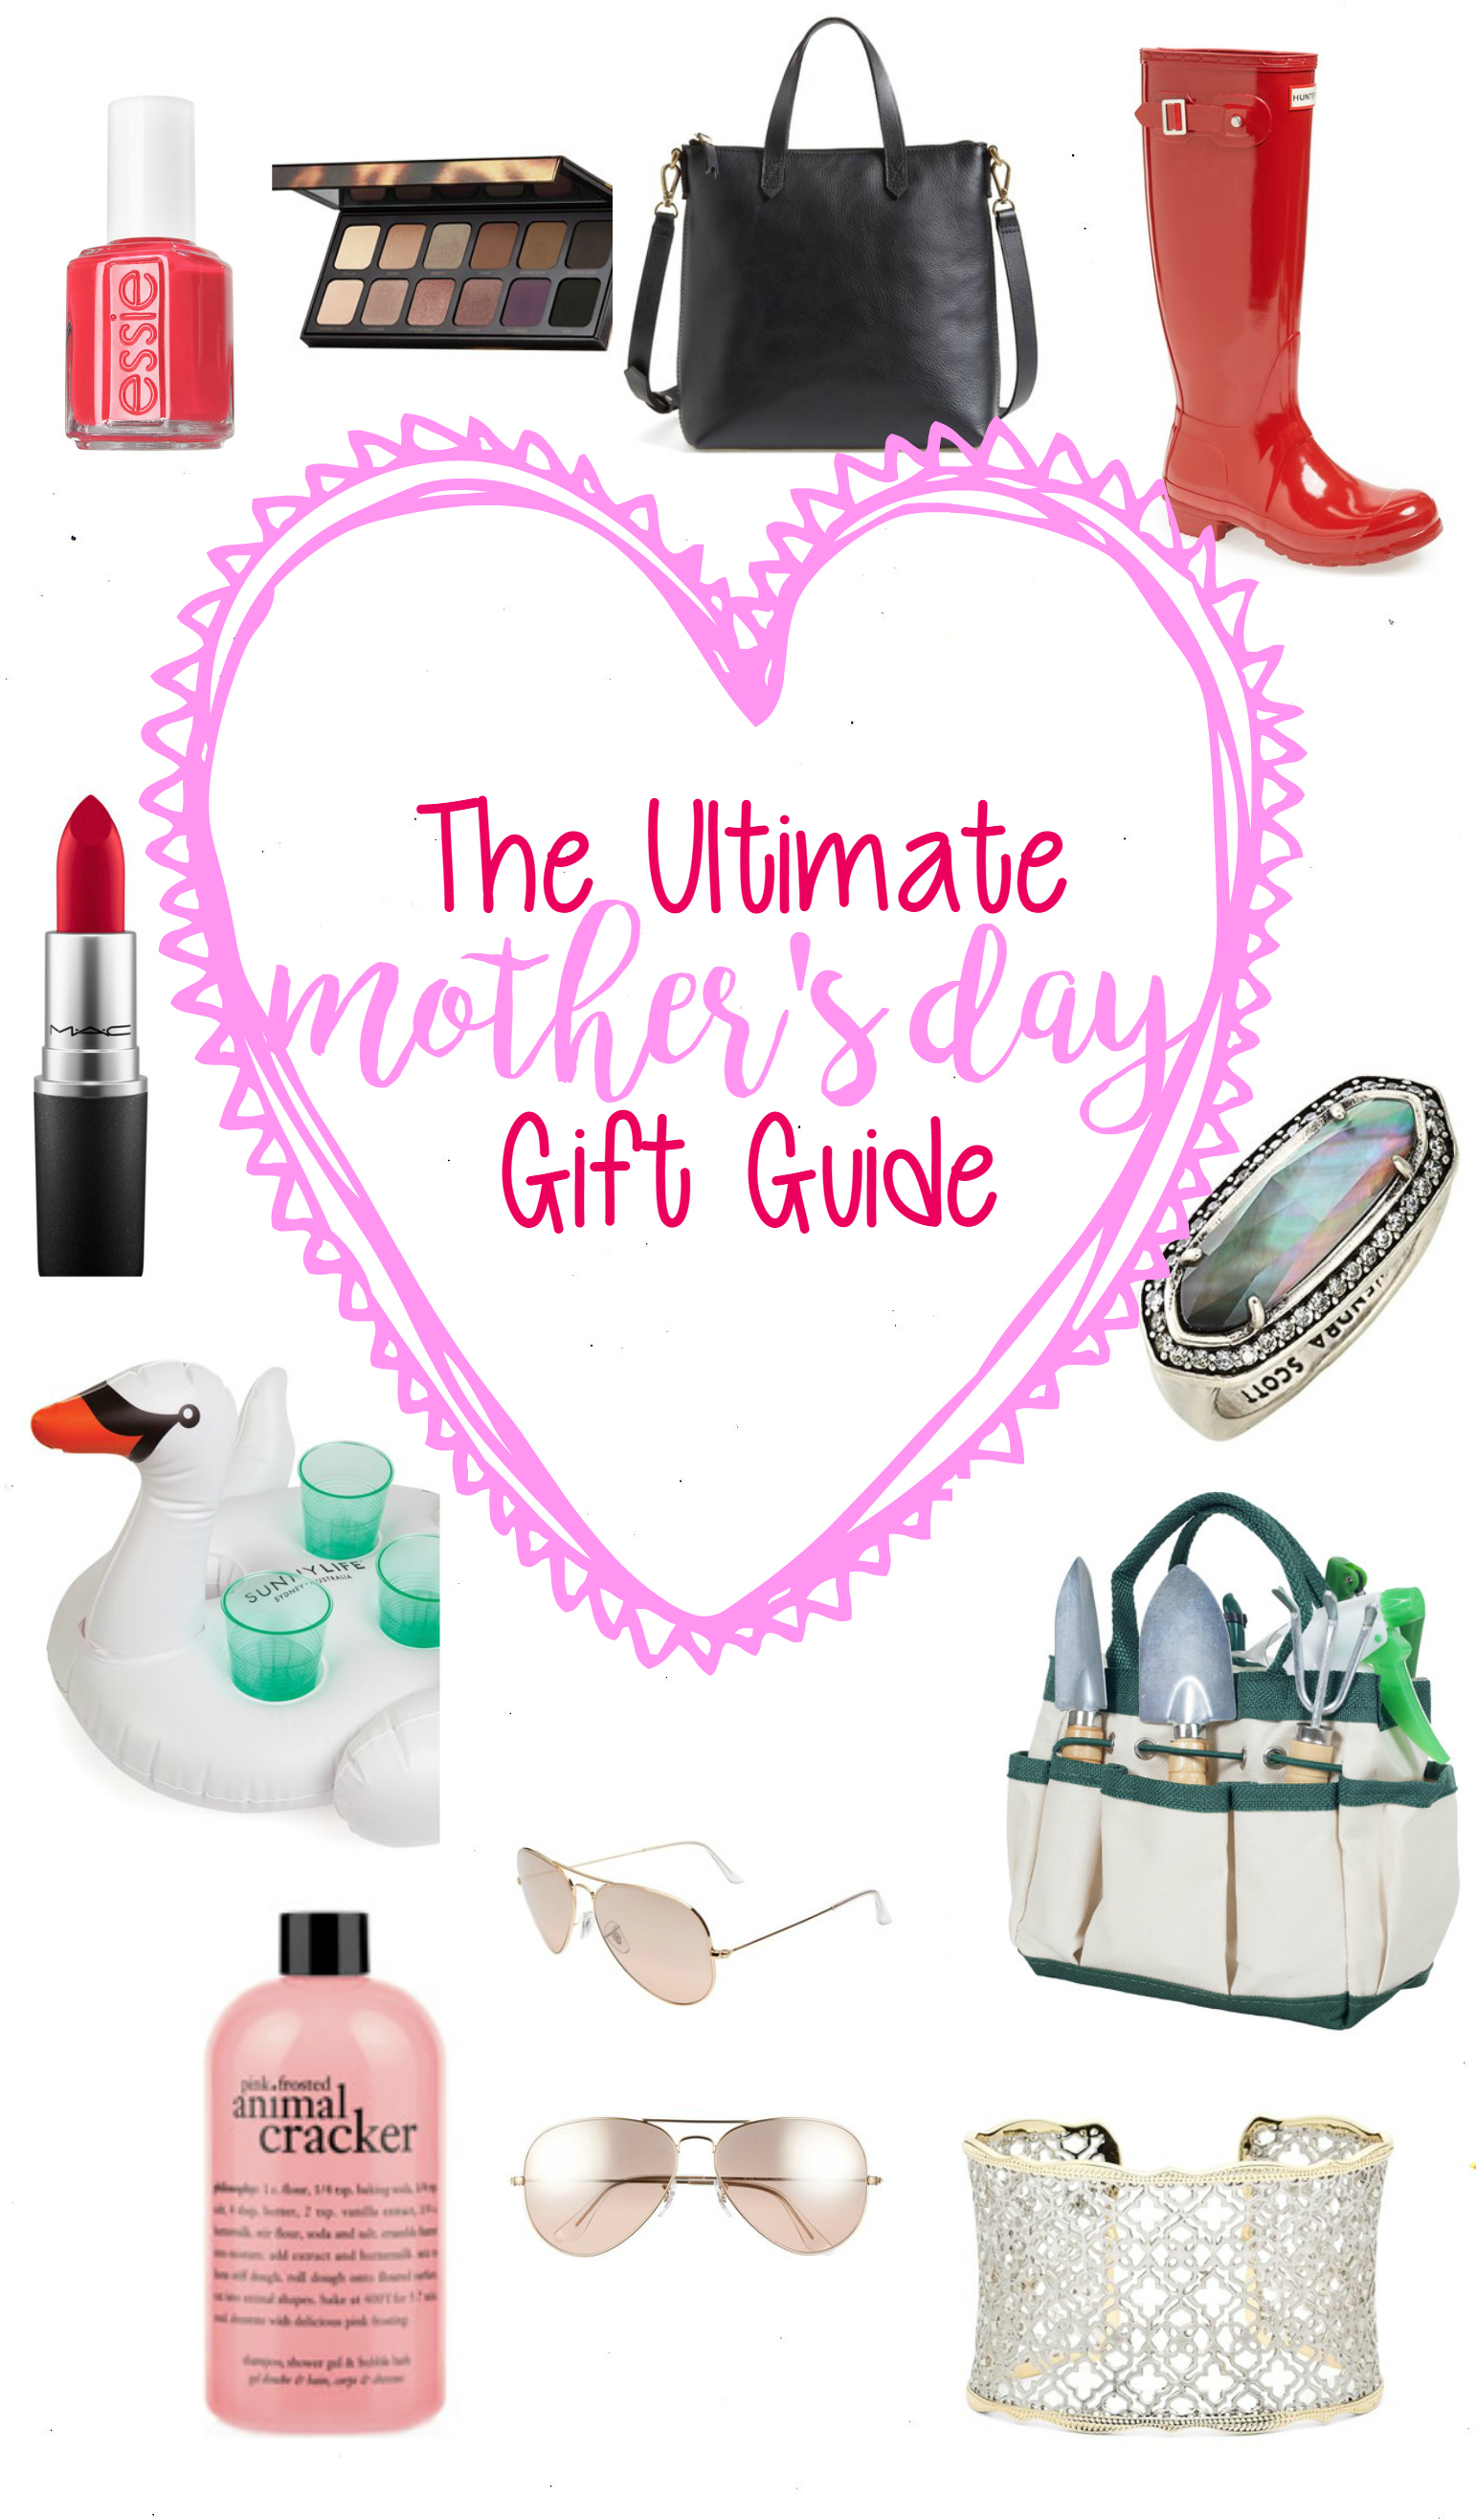 I hope you find something for all of your favorite mothers in your life... or yourself. Enjoy this ultimate Mother's Day gift guide! 